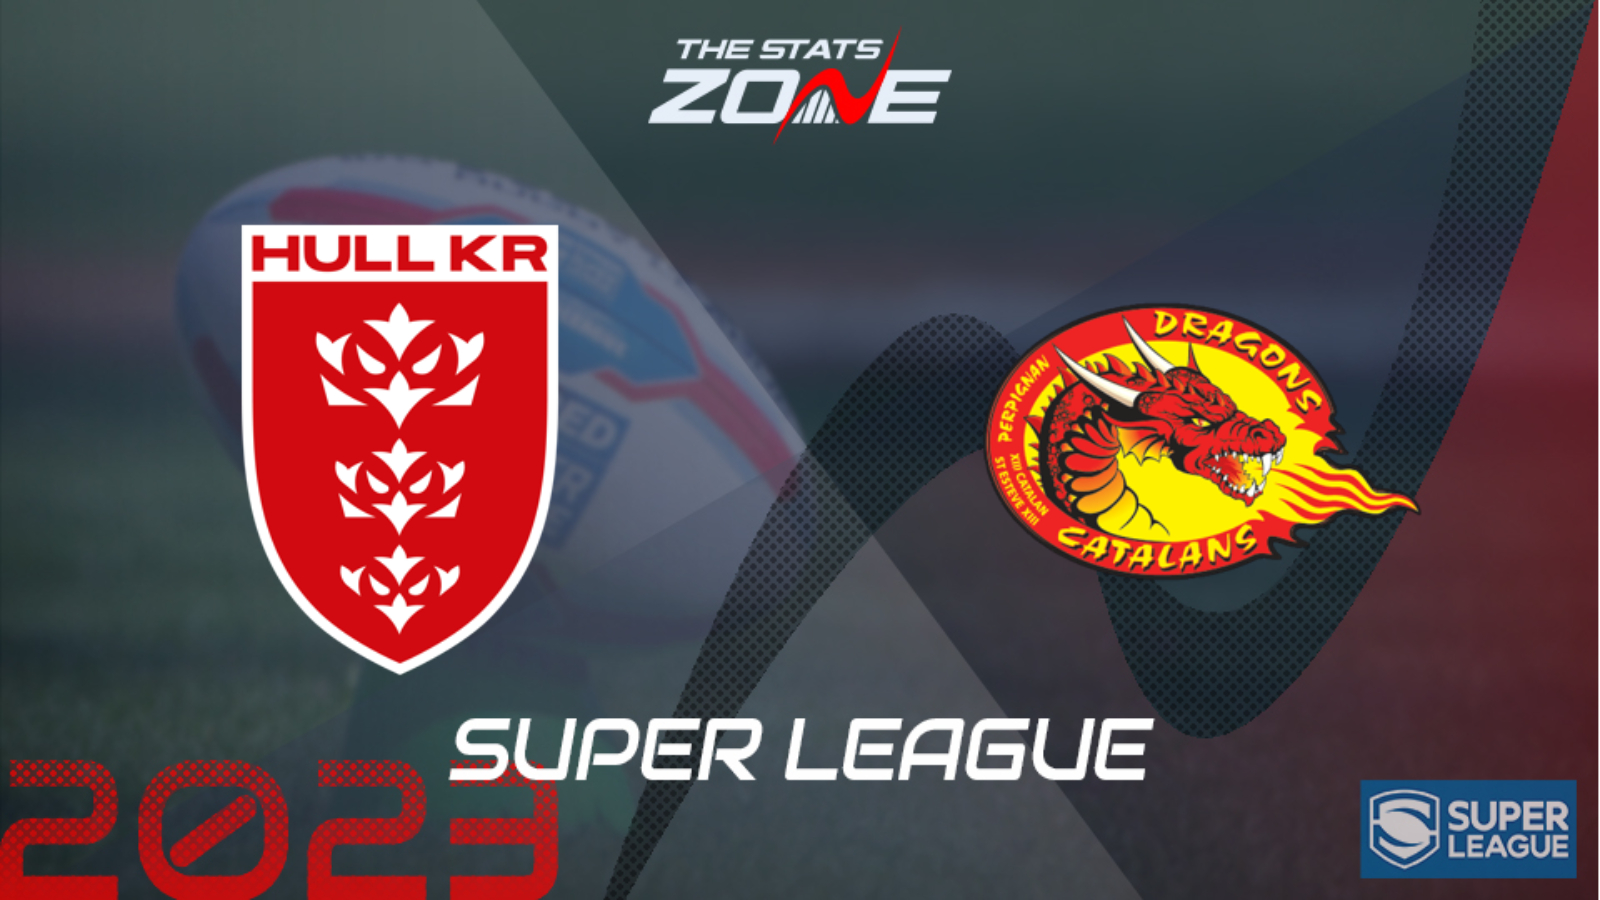 Hull KR vs Catalans Dragons – League Stage